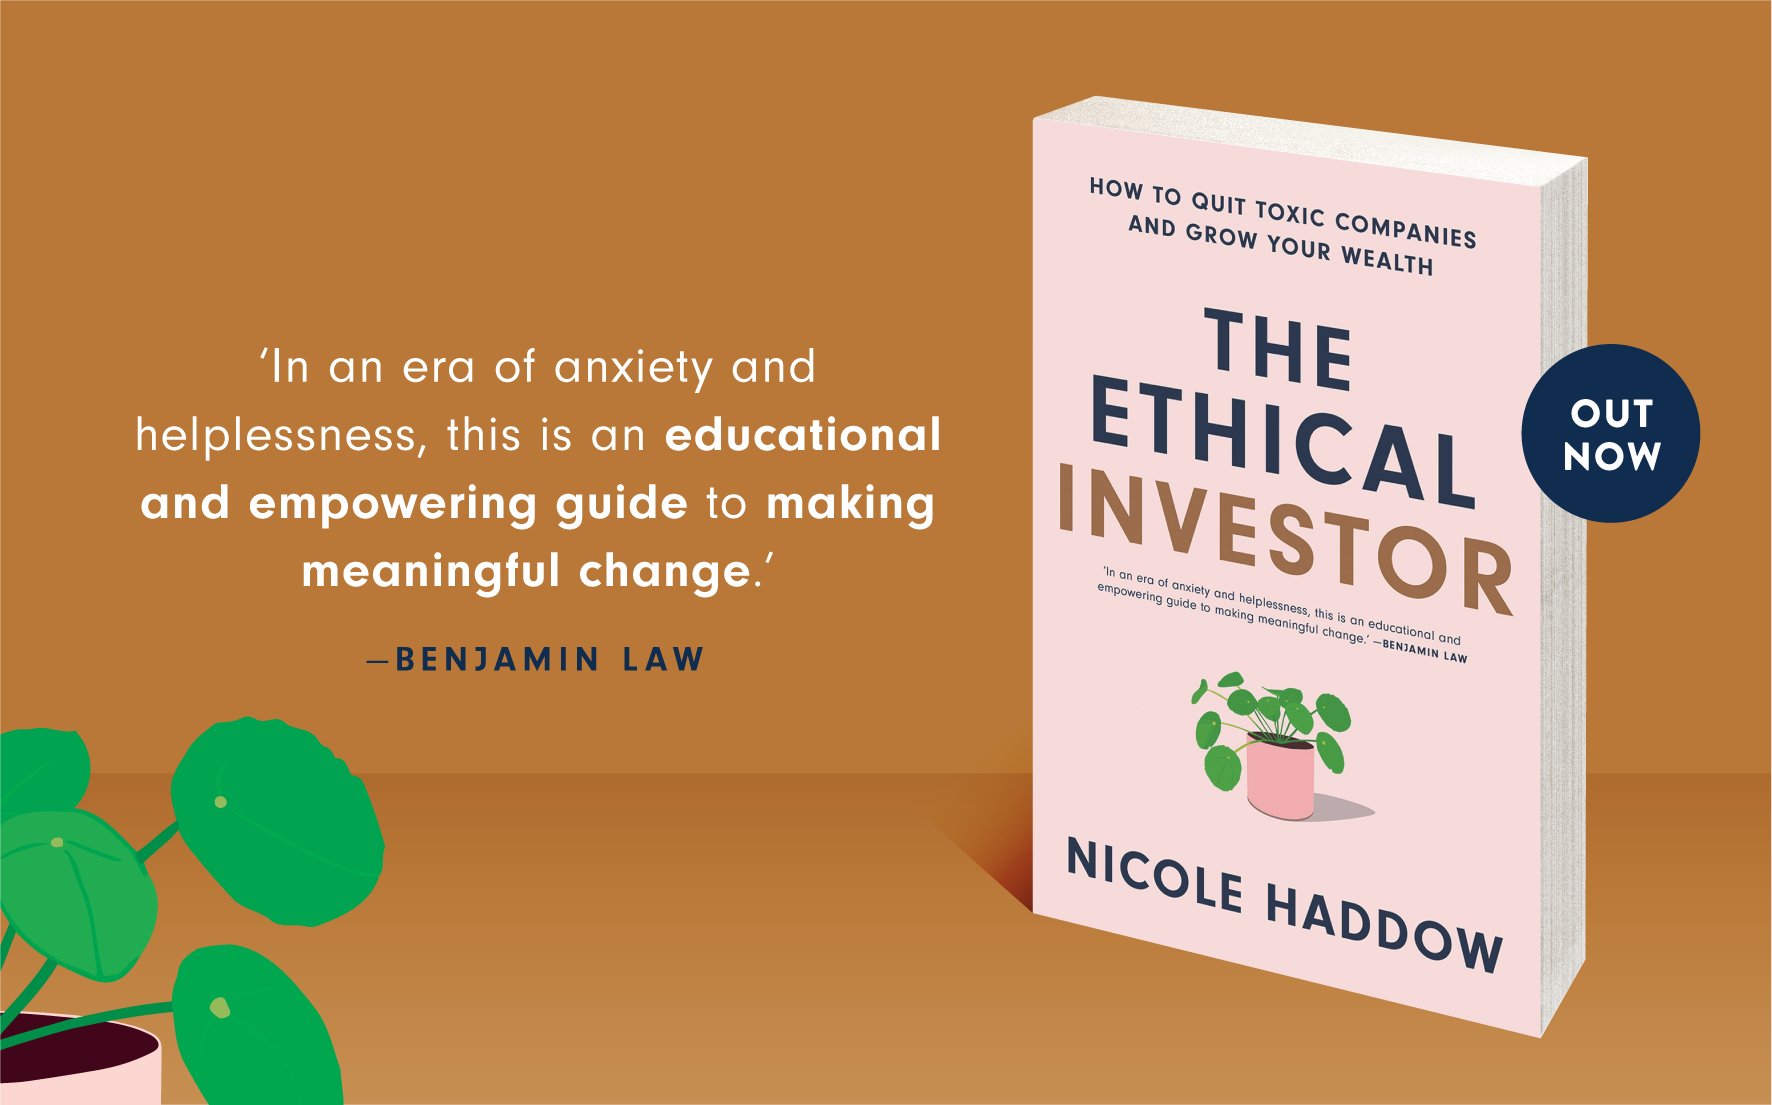 The Ethical Investor: out now